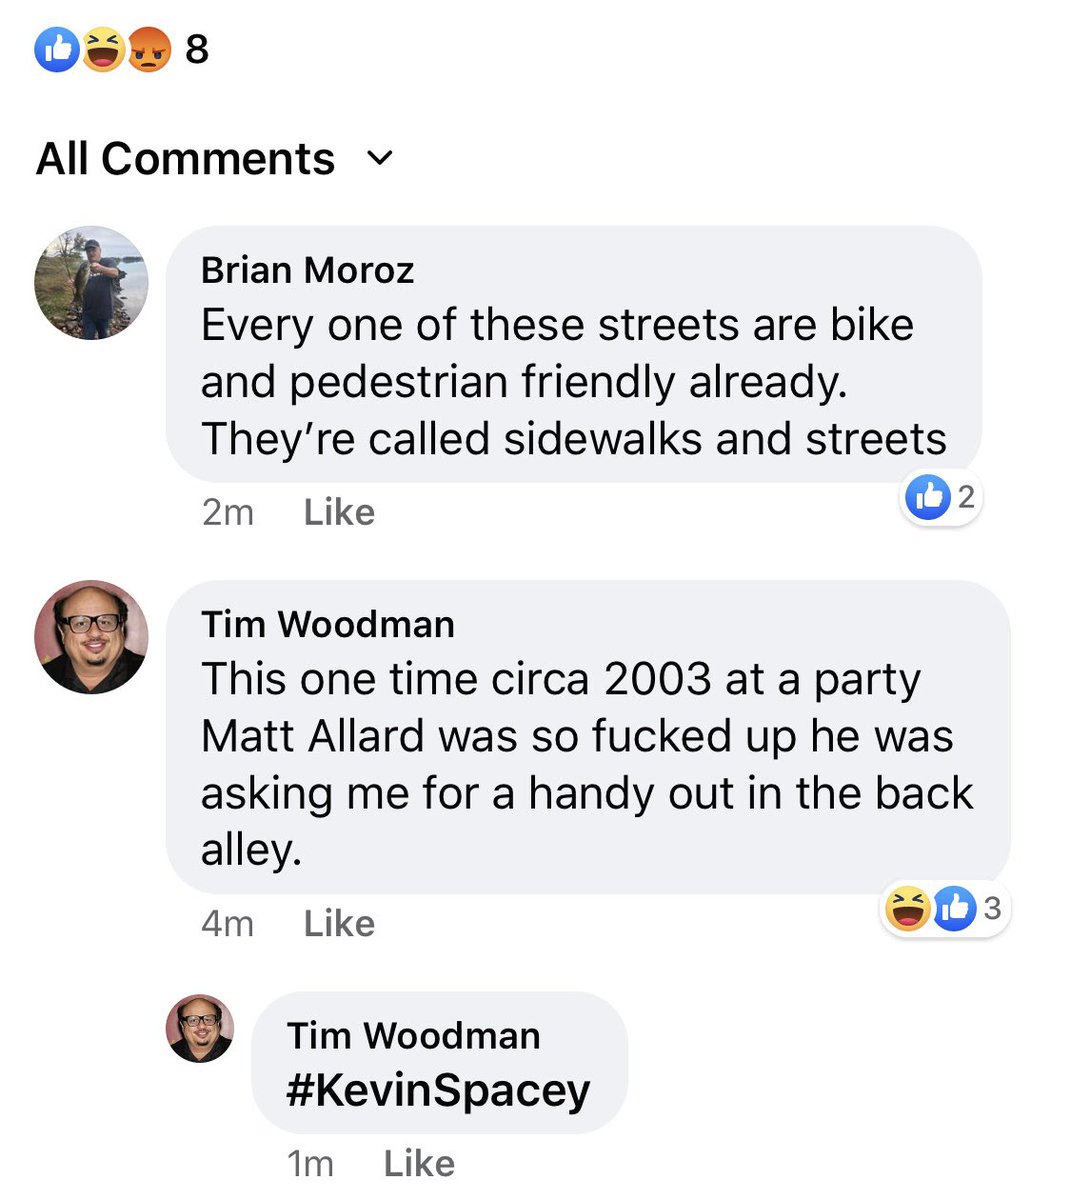 The true magic tho is in the actual Wise Up Winnipeg Facebook group itself. A Wild West sort of saloon where admins mainly exist to ban people who question doctrine, and otherwise allow some of the most belligerent rhetoric I’ve ever seen in muncipal poltics. All in 1 hour! 6/